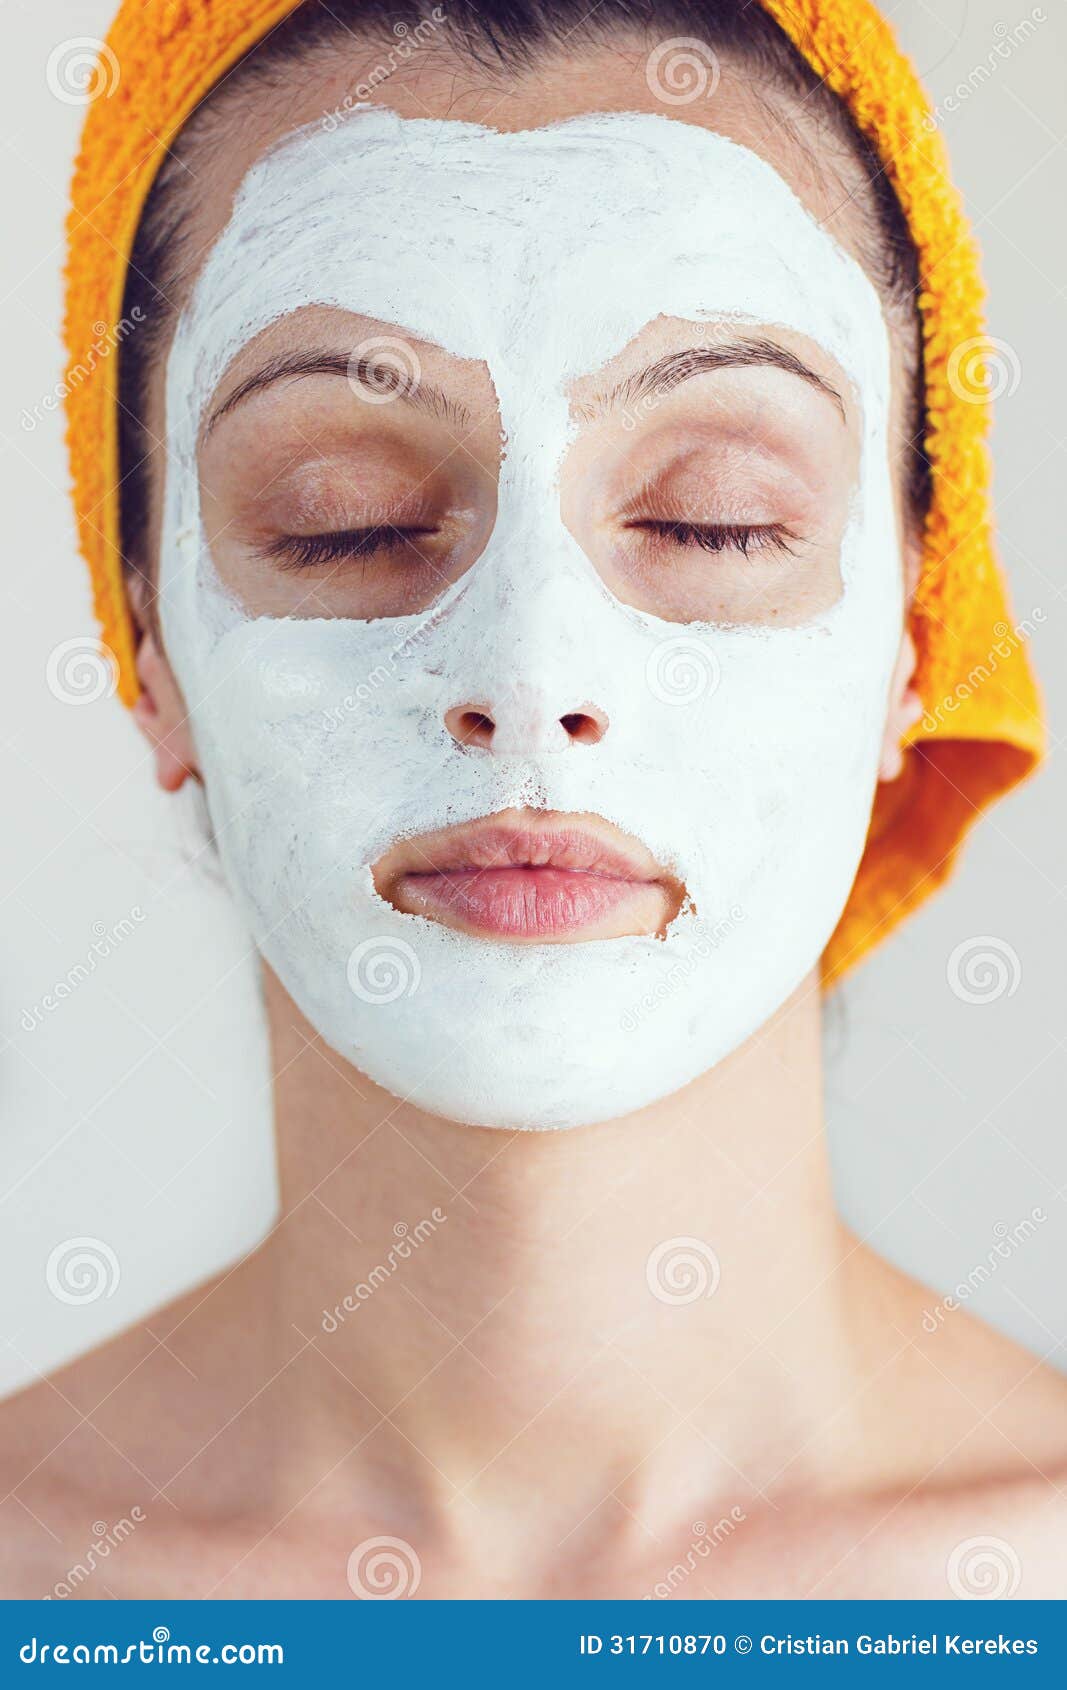 woman having a white smoothing face mask